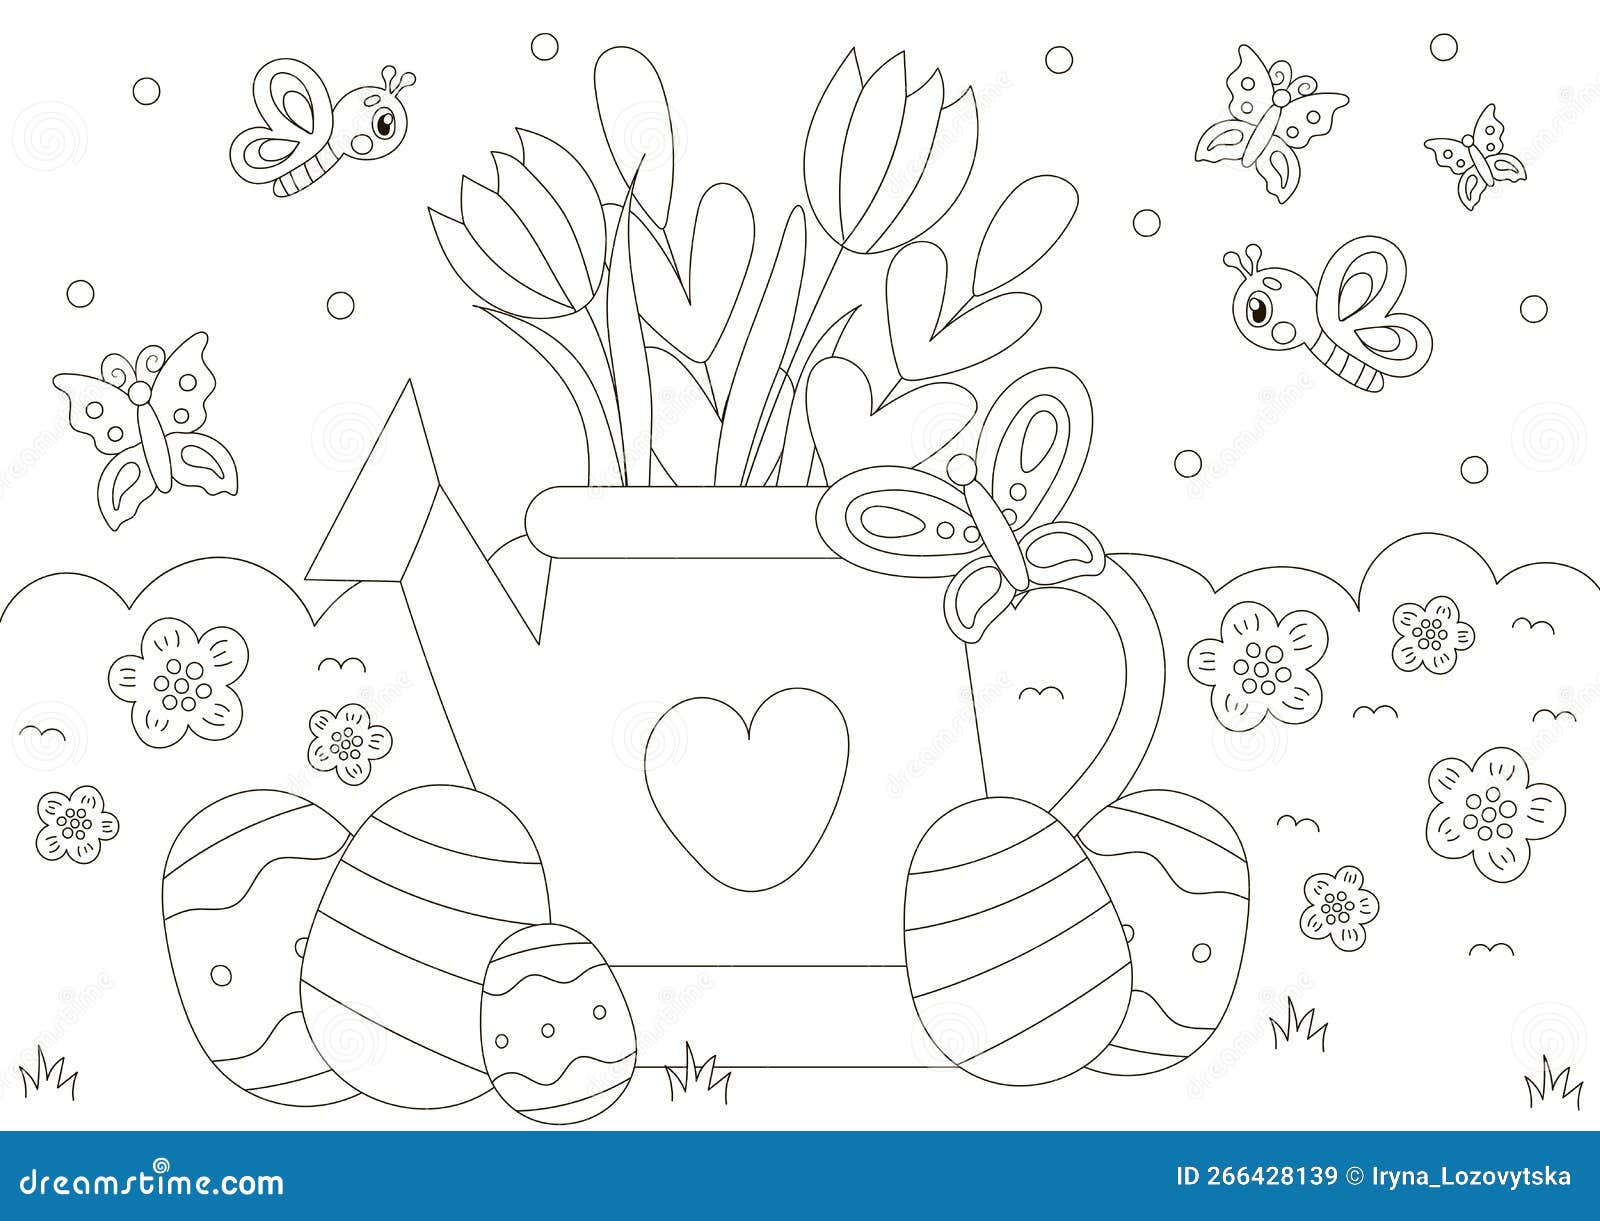 Cute coloring page for spring holidays with watering can and flowers in scandinavian style stock vector